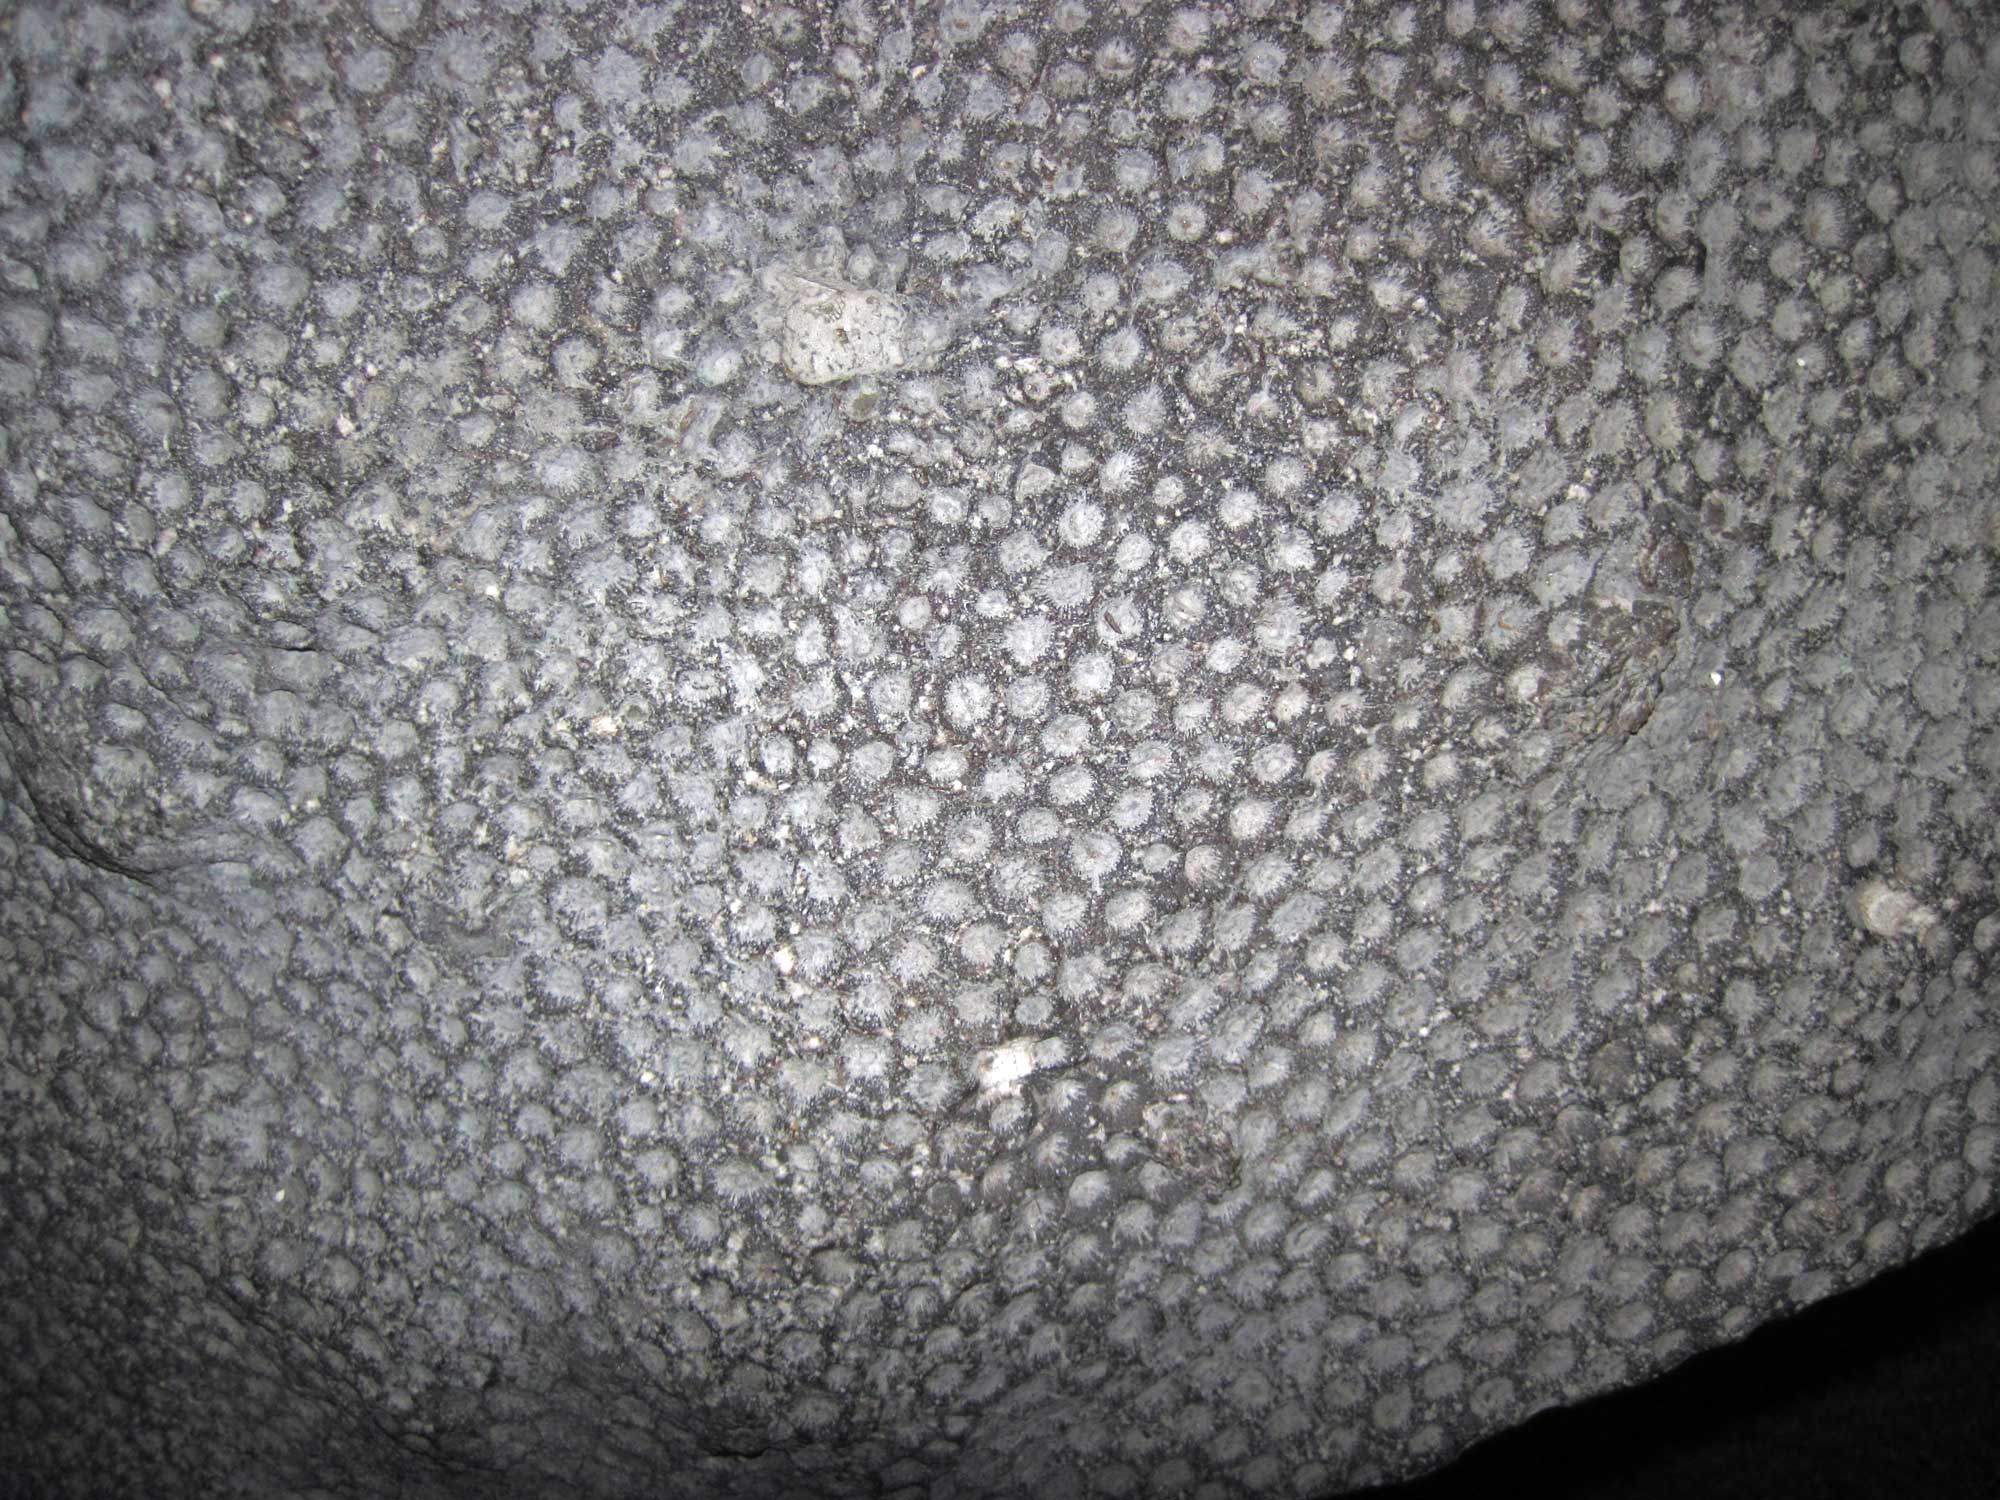 Photograph of the colonial rugose coral Hexagonaria from the Devonian of Michigan. The photo shows part of a curved gray rock covered with a series of shallow circular pits. 